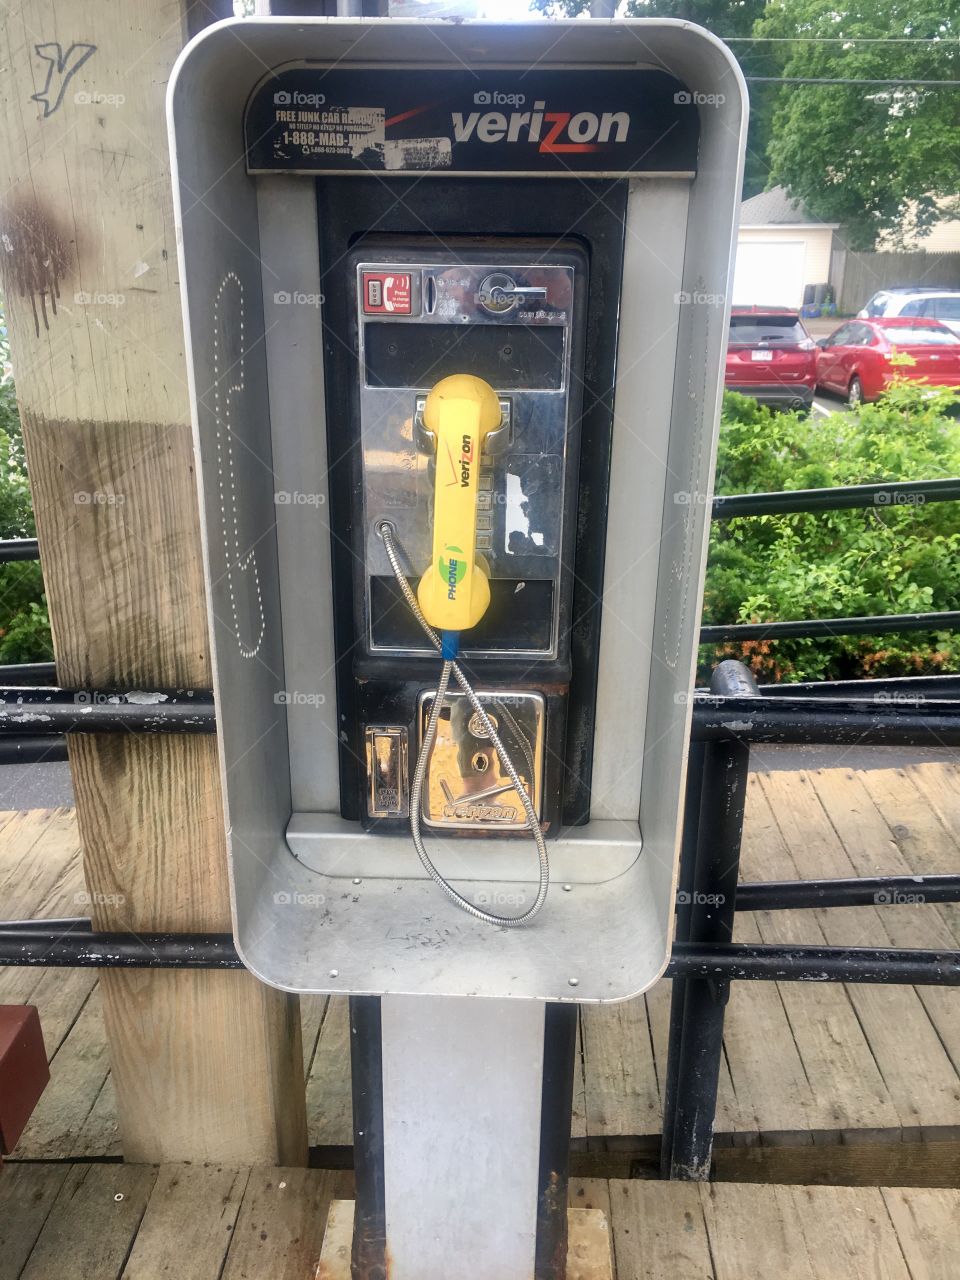 Last pay phone in existence?